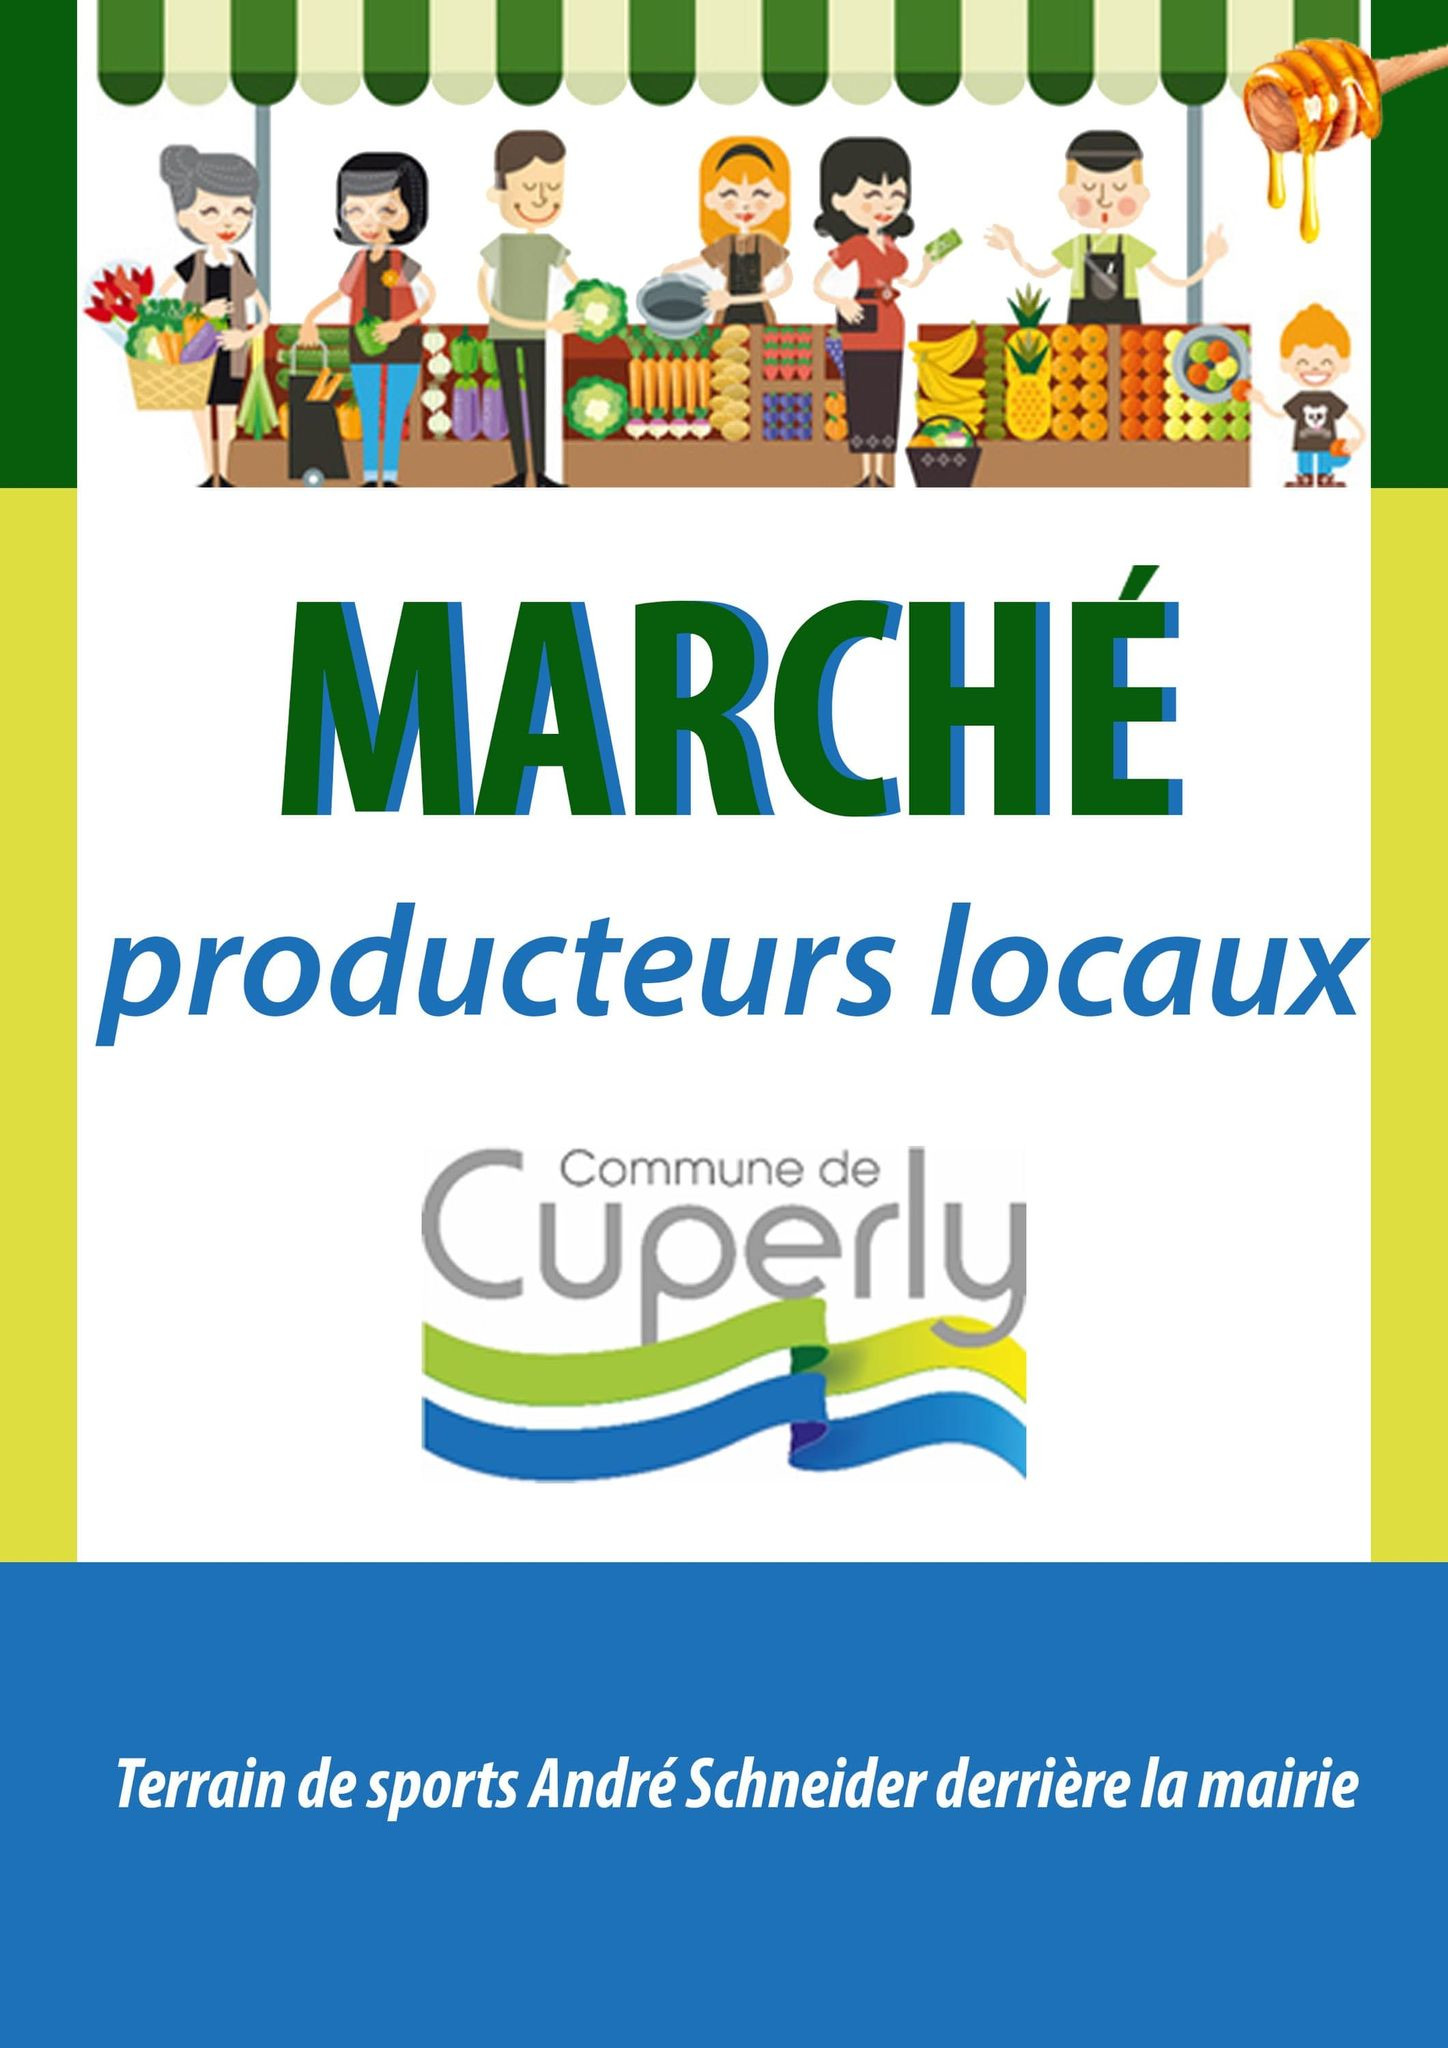 2022 04 26 marche cuperly